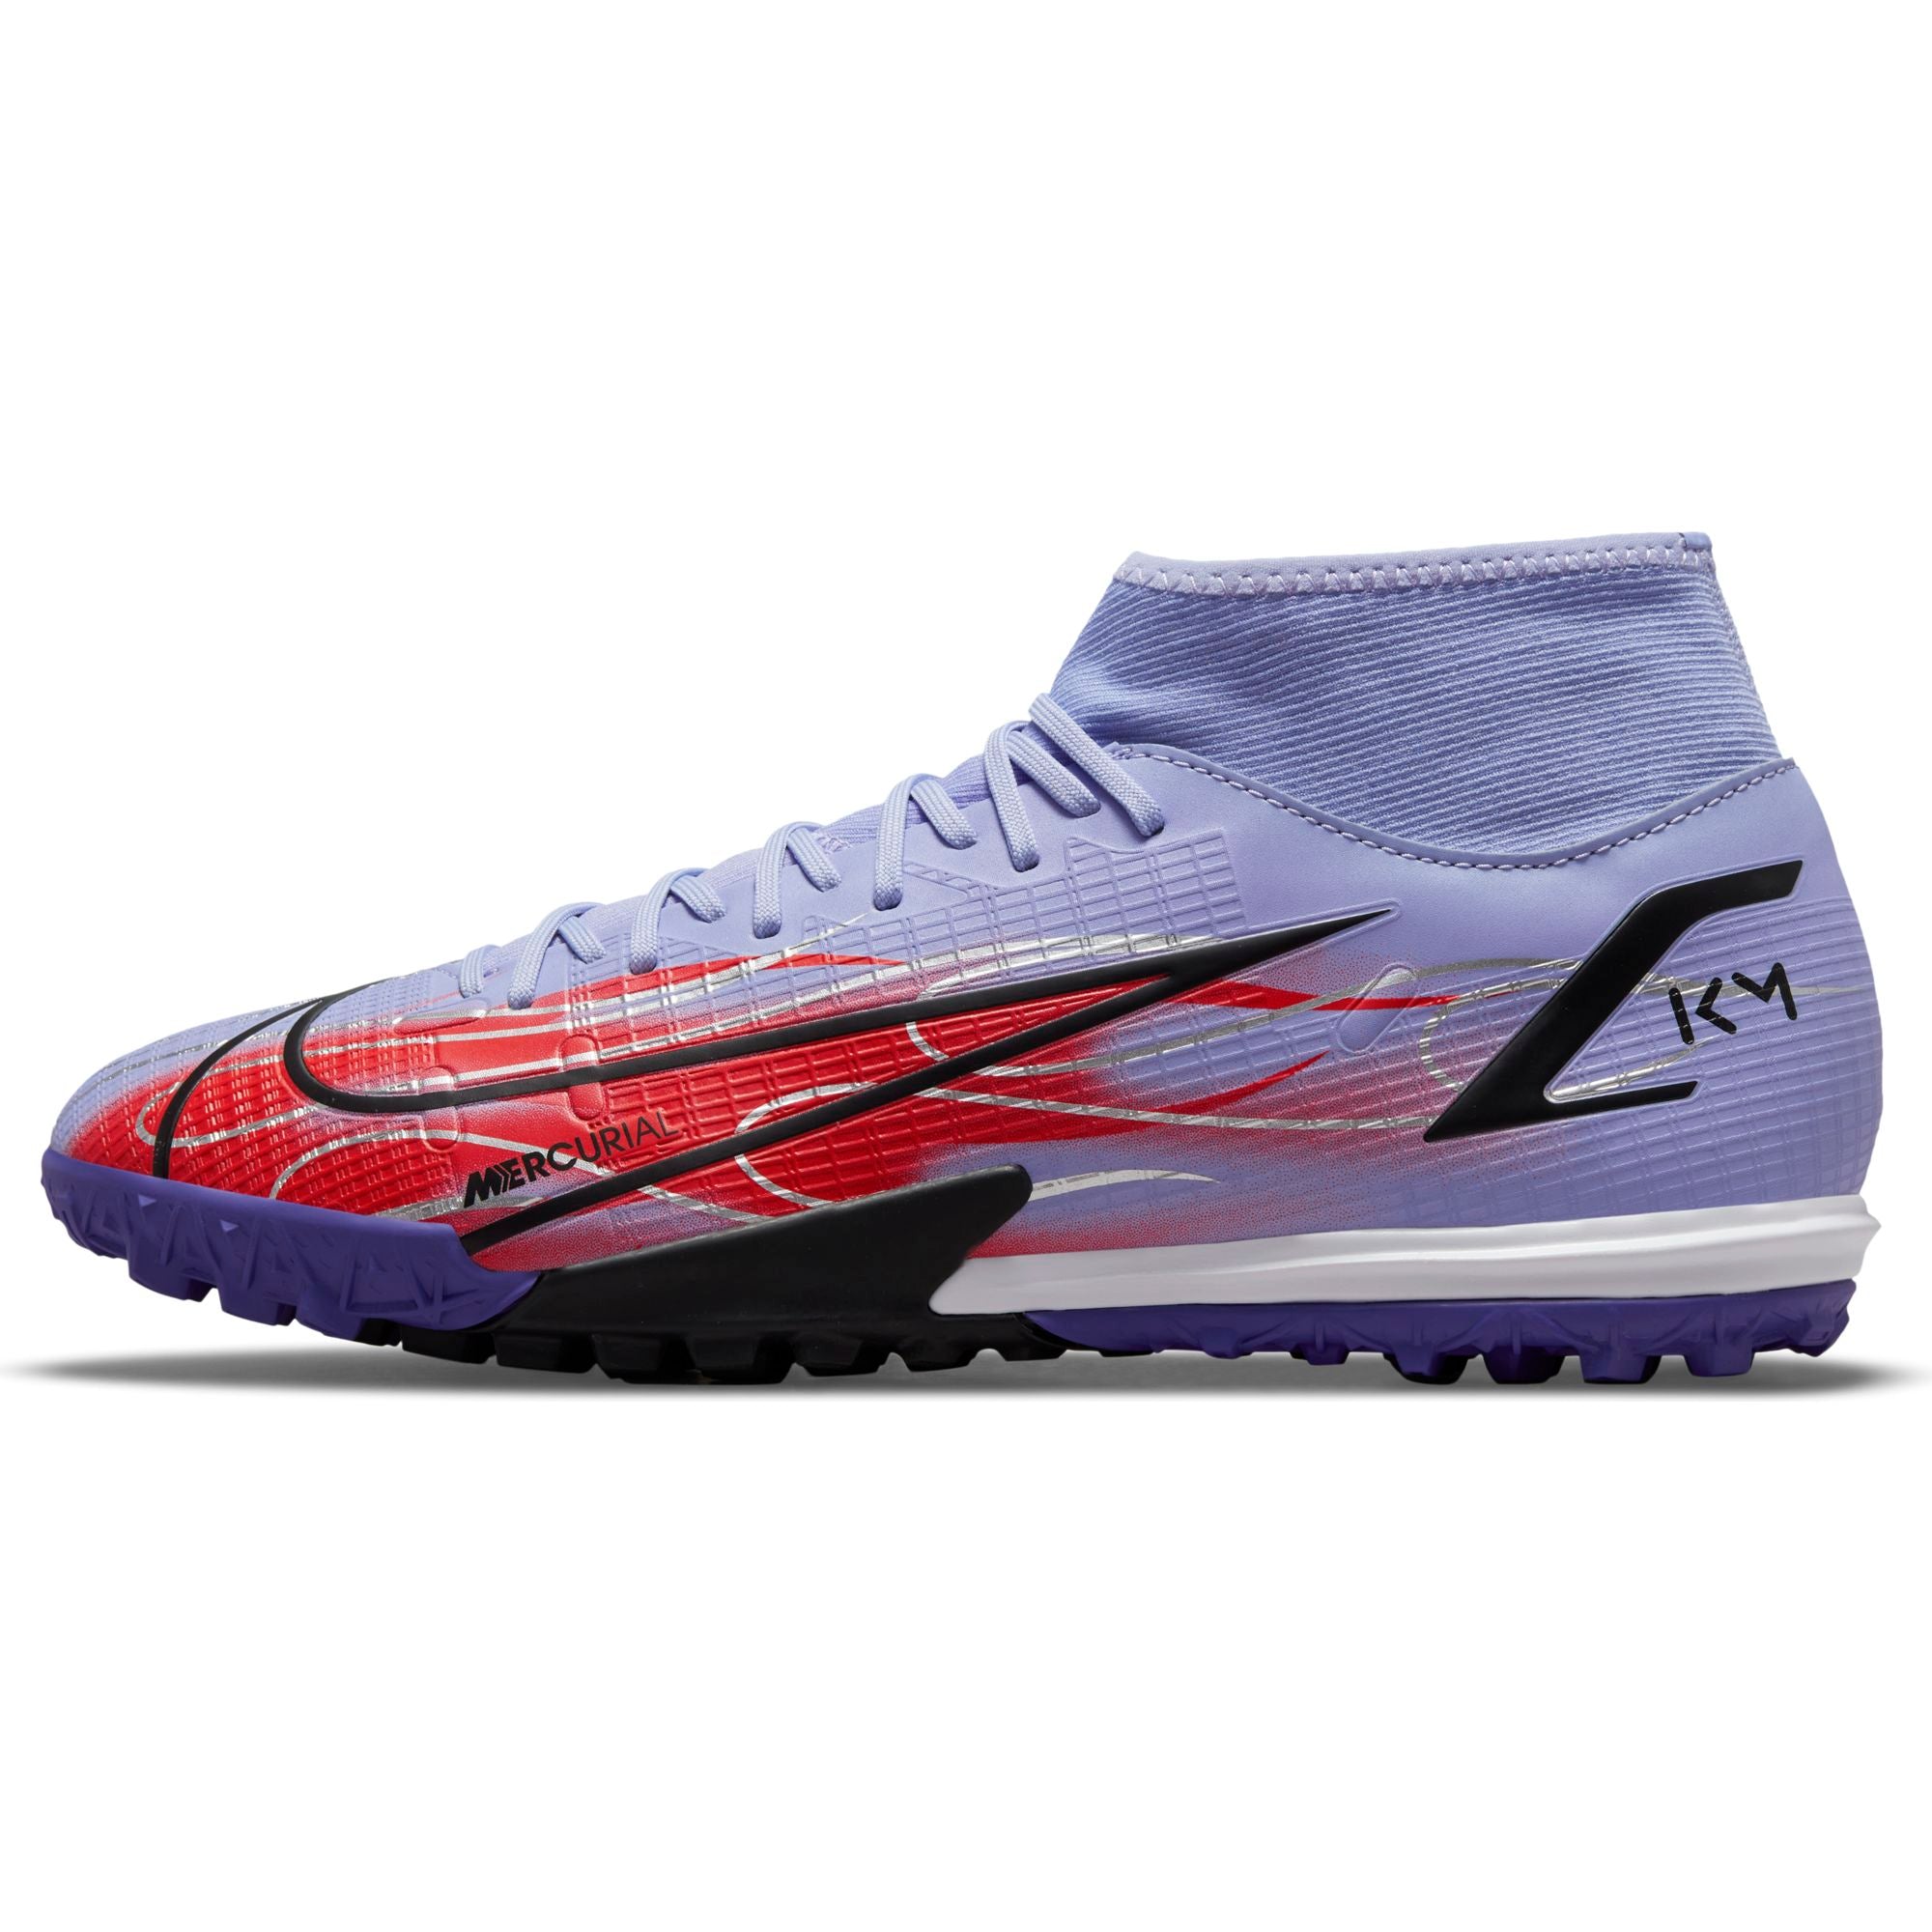 Mercurial Superfly 8 KM TF Turf Soccer Shoes